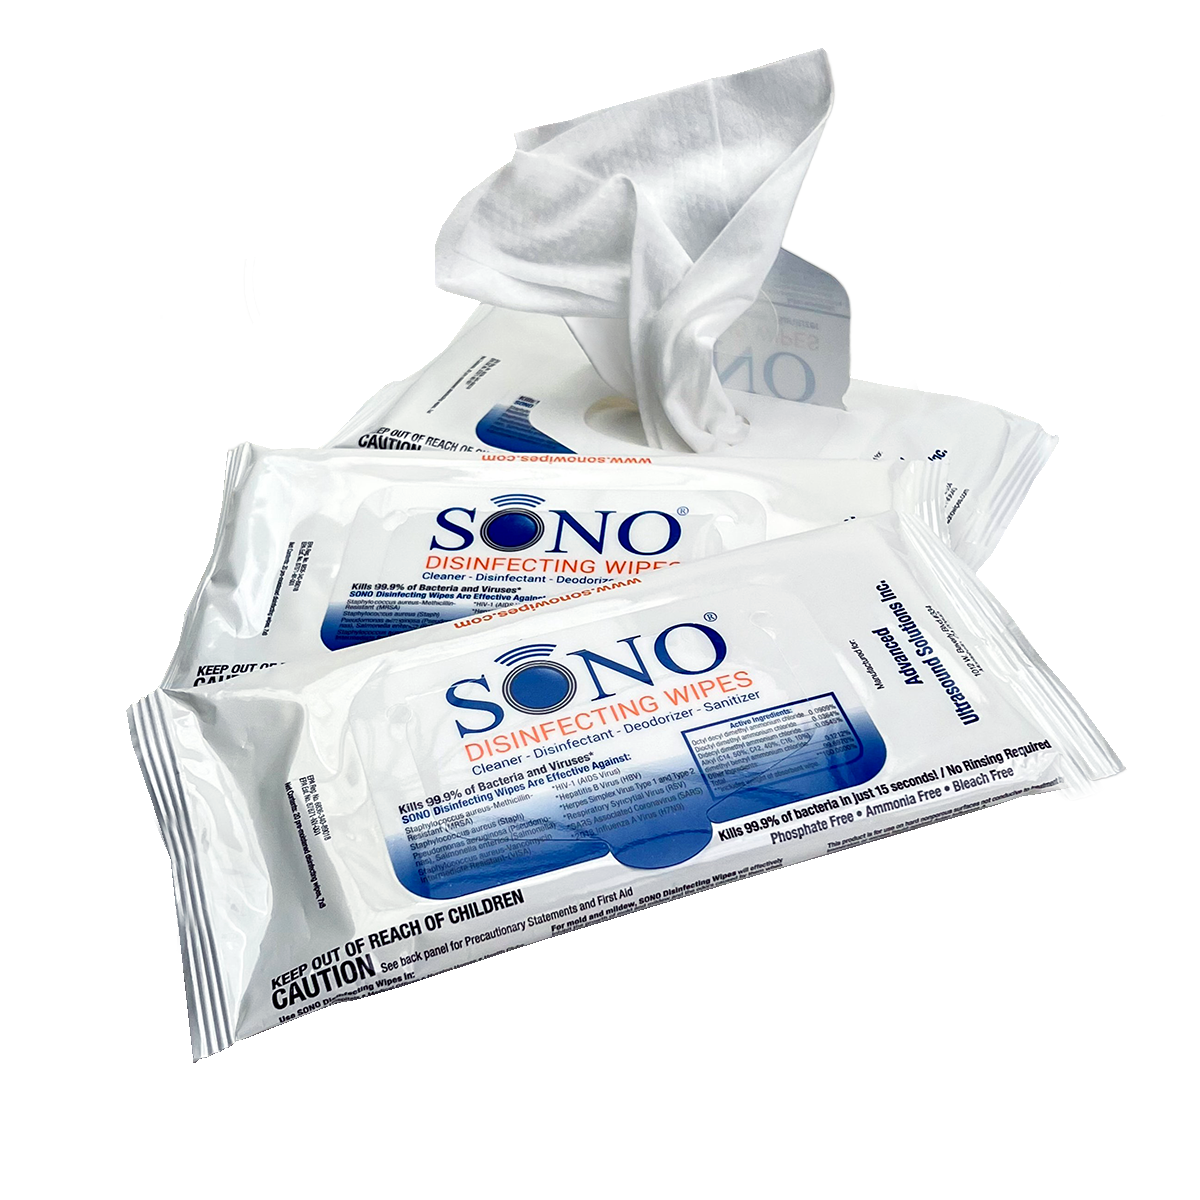 Three packs of SONO Travel Safe Disinfecting Wipes, ensuring you have ample supply during your travels.